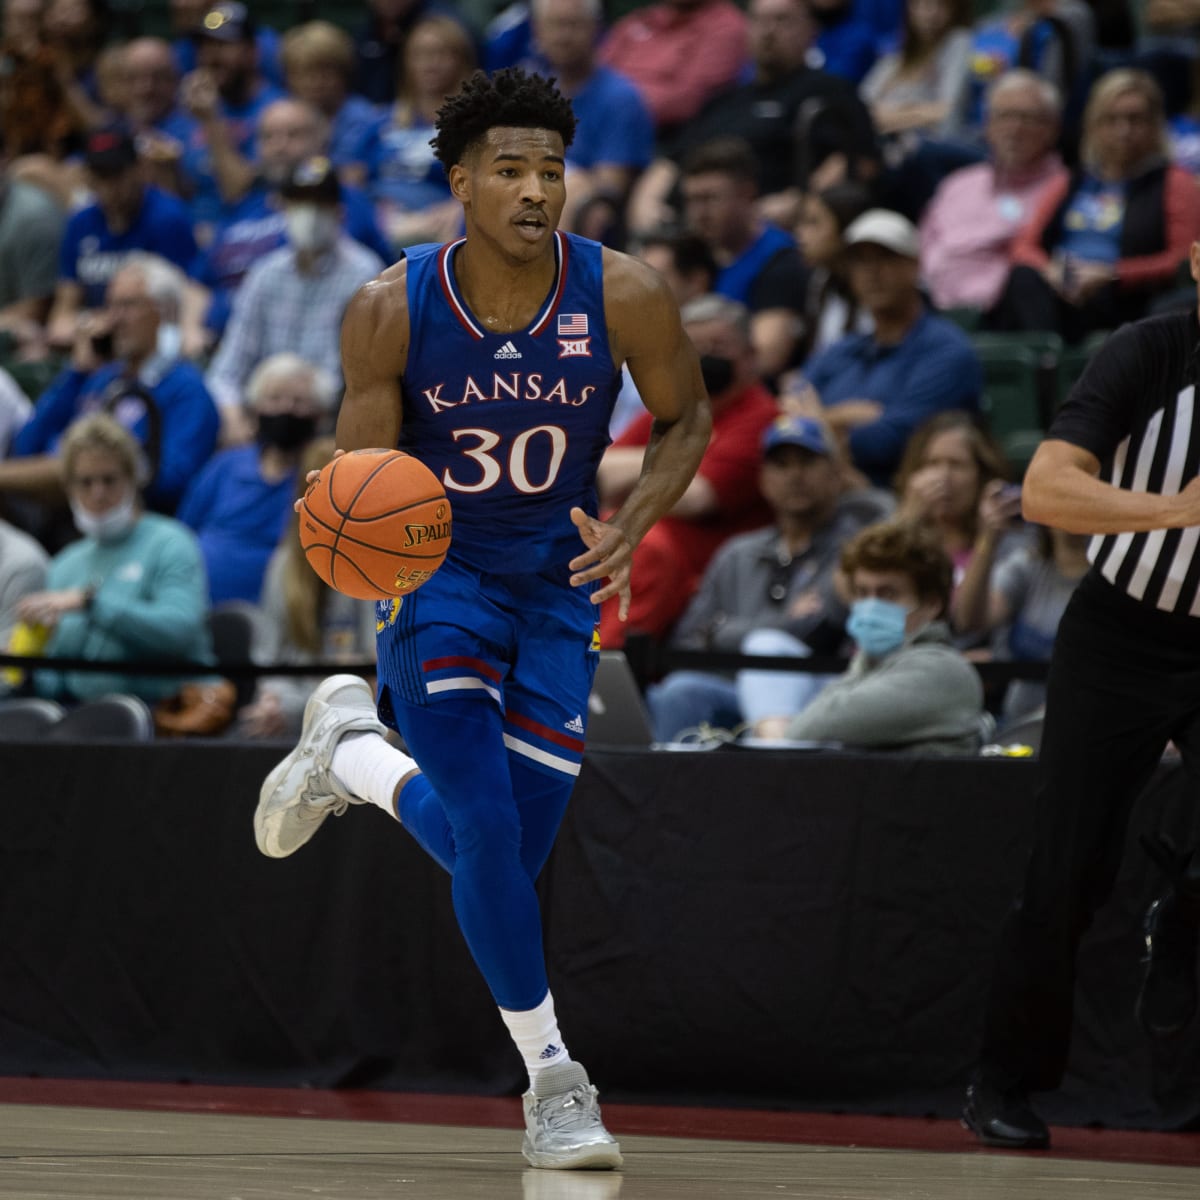 Watch Kansas at Baylor College basketball live stream, TV time - How to Watch and Stream Major League and College Sports